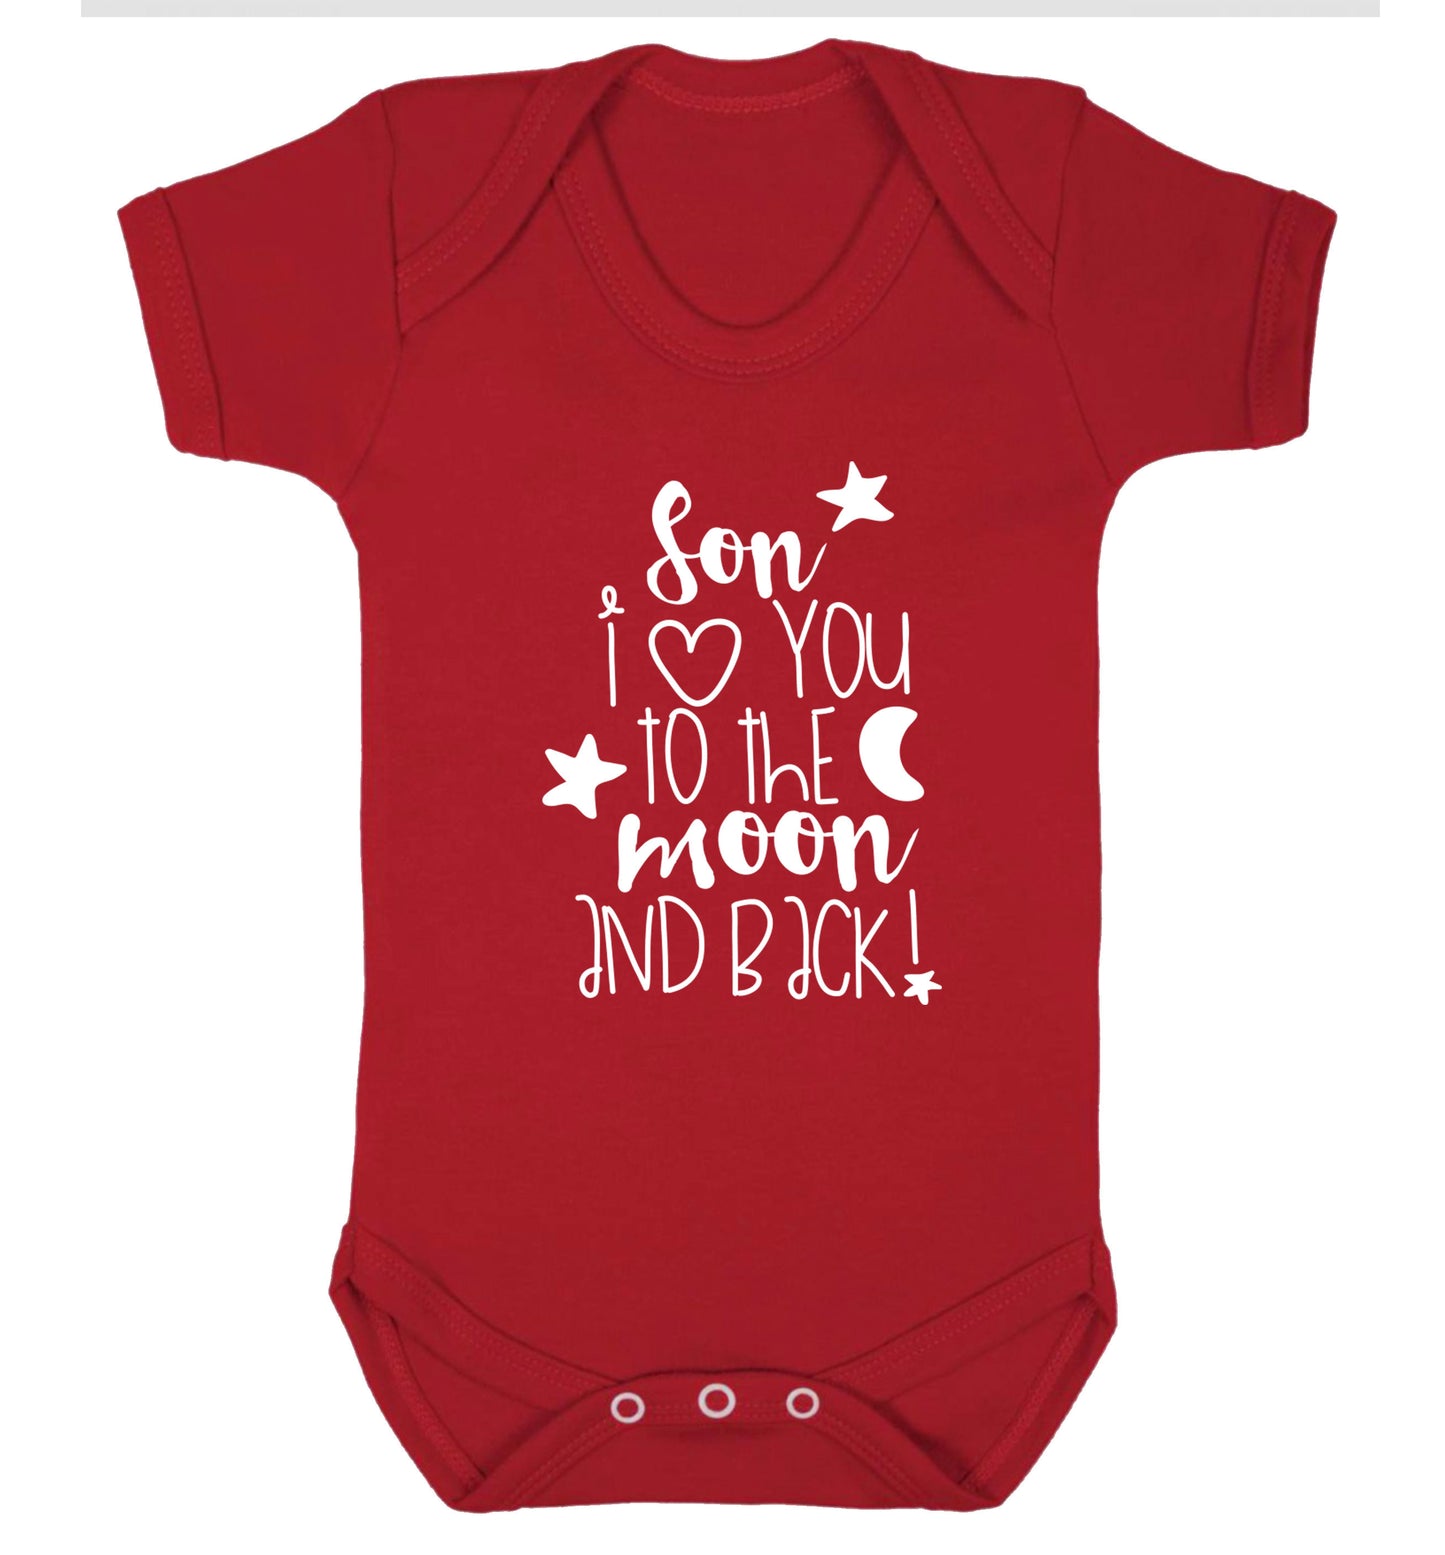 Son I love you to the moon and back Baby Vest red 18-24 months